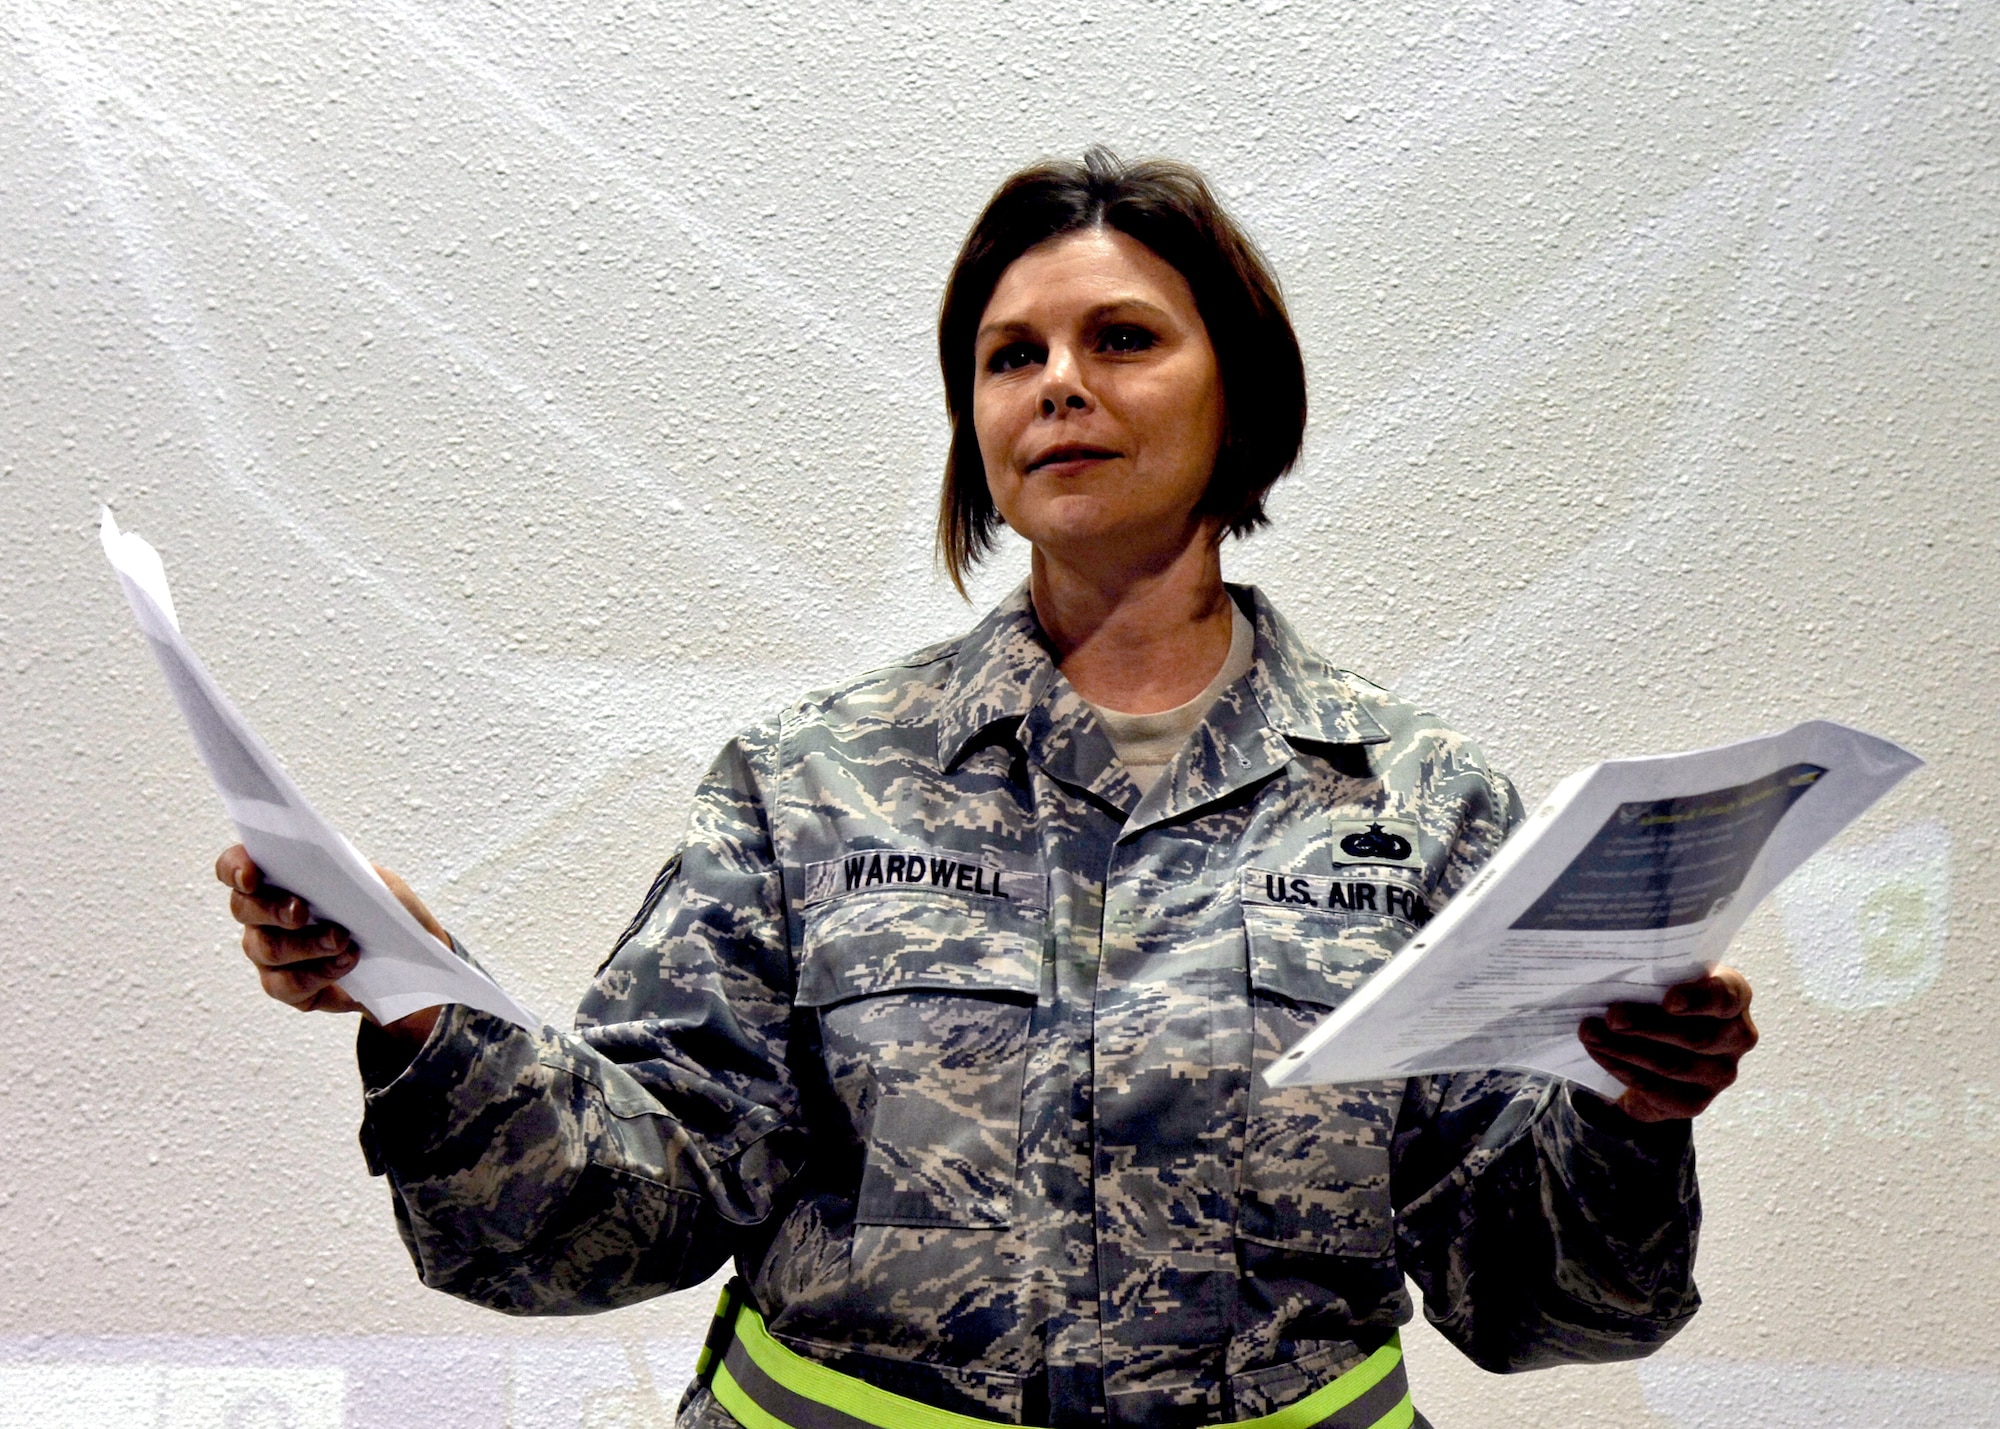 HOLLOMAN AIR FORCE BASE N.M. -- Tech Sgt. Judith Wardwell, superintendent of the Airman and Family Readiness Center, briefs military members about their resources while in the area of responsibility at the Personnel Deployment Facility at Basic Expeditionary Airfield Resources Base during Exercise Cornet Gold Rush here, Oct. 6. The exercise scenario consisted of processing Airmen for deployment. (U.S. Air Force photo by Staff Sgt.  Anthony Nelson Jr.)